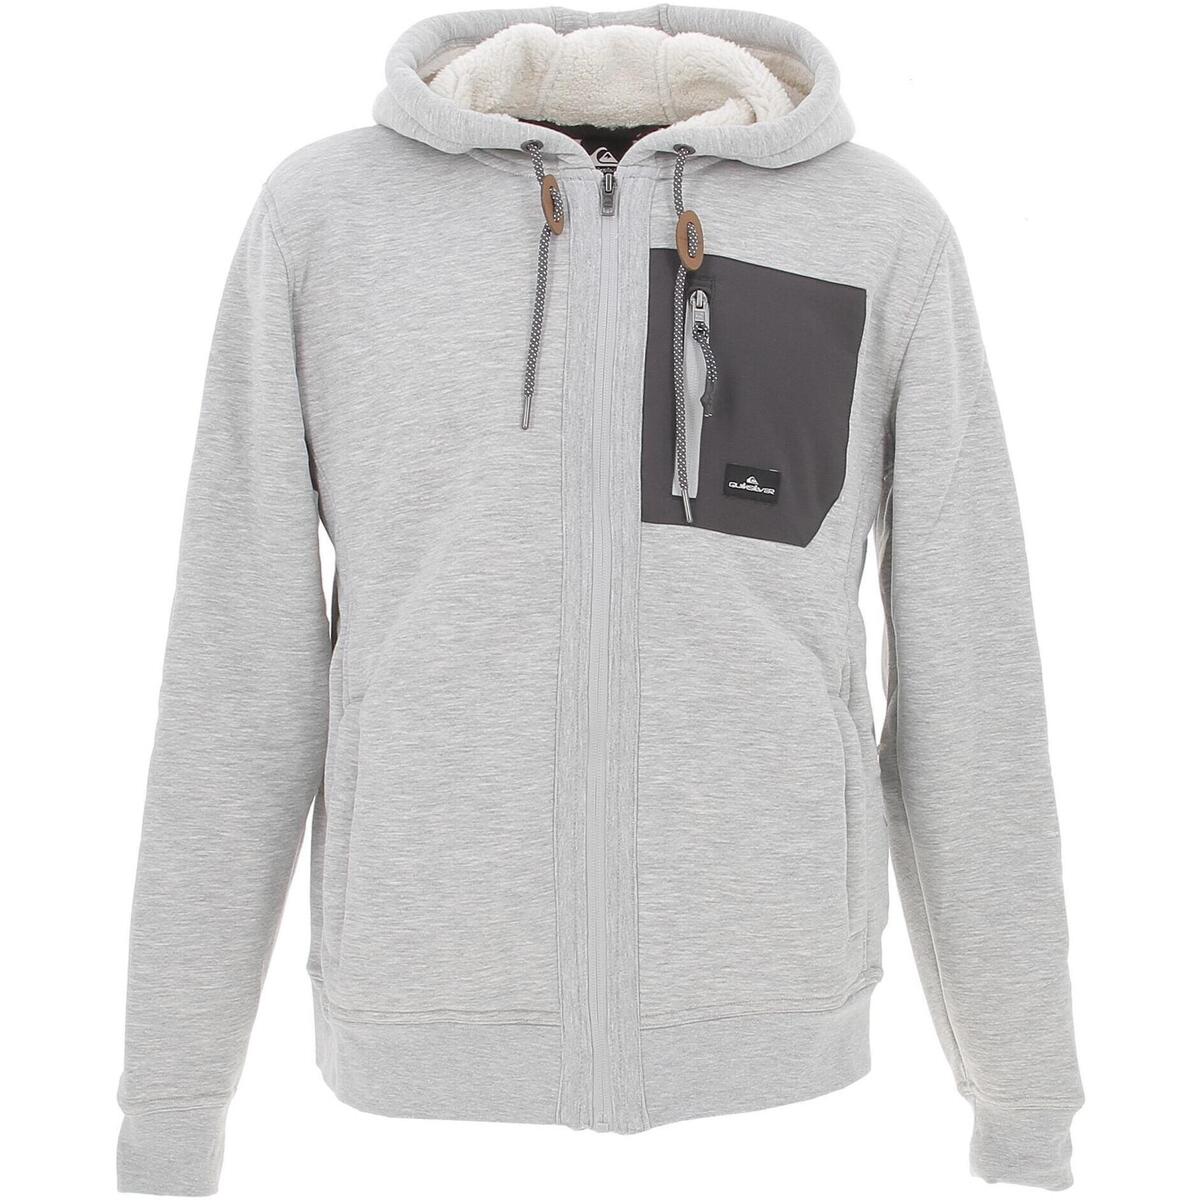 Quiksilver Gris Out there otlr uzXkTvW0